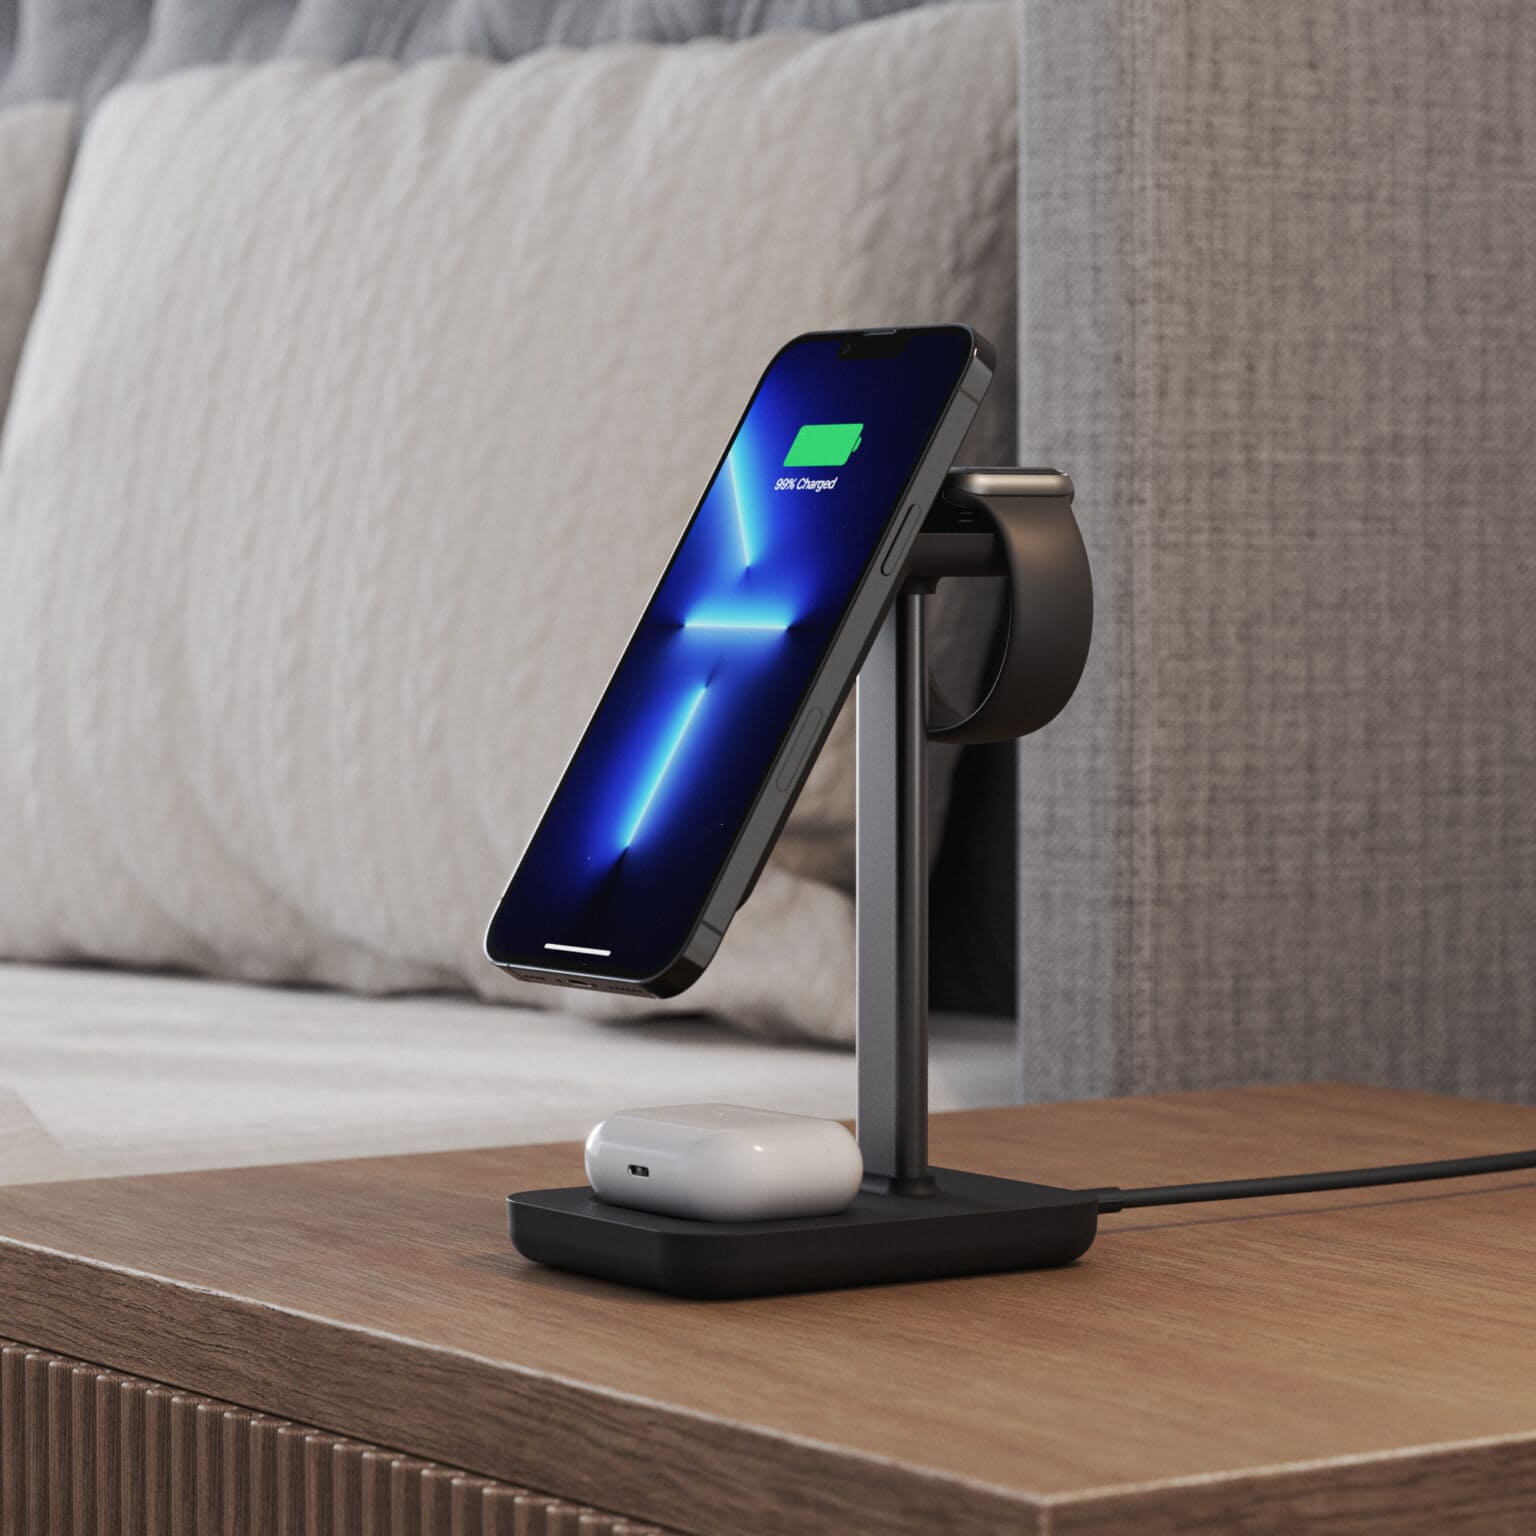 Journey 3 in 1 Wireless Charging Station giveaway: Sleep soundly knowing all your devices will be fully charged in the morning.